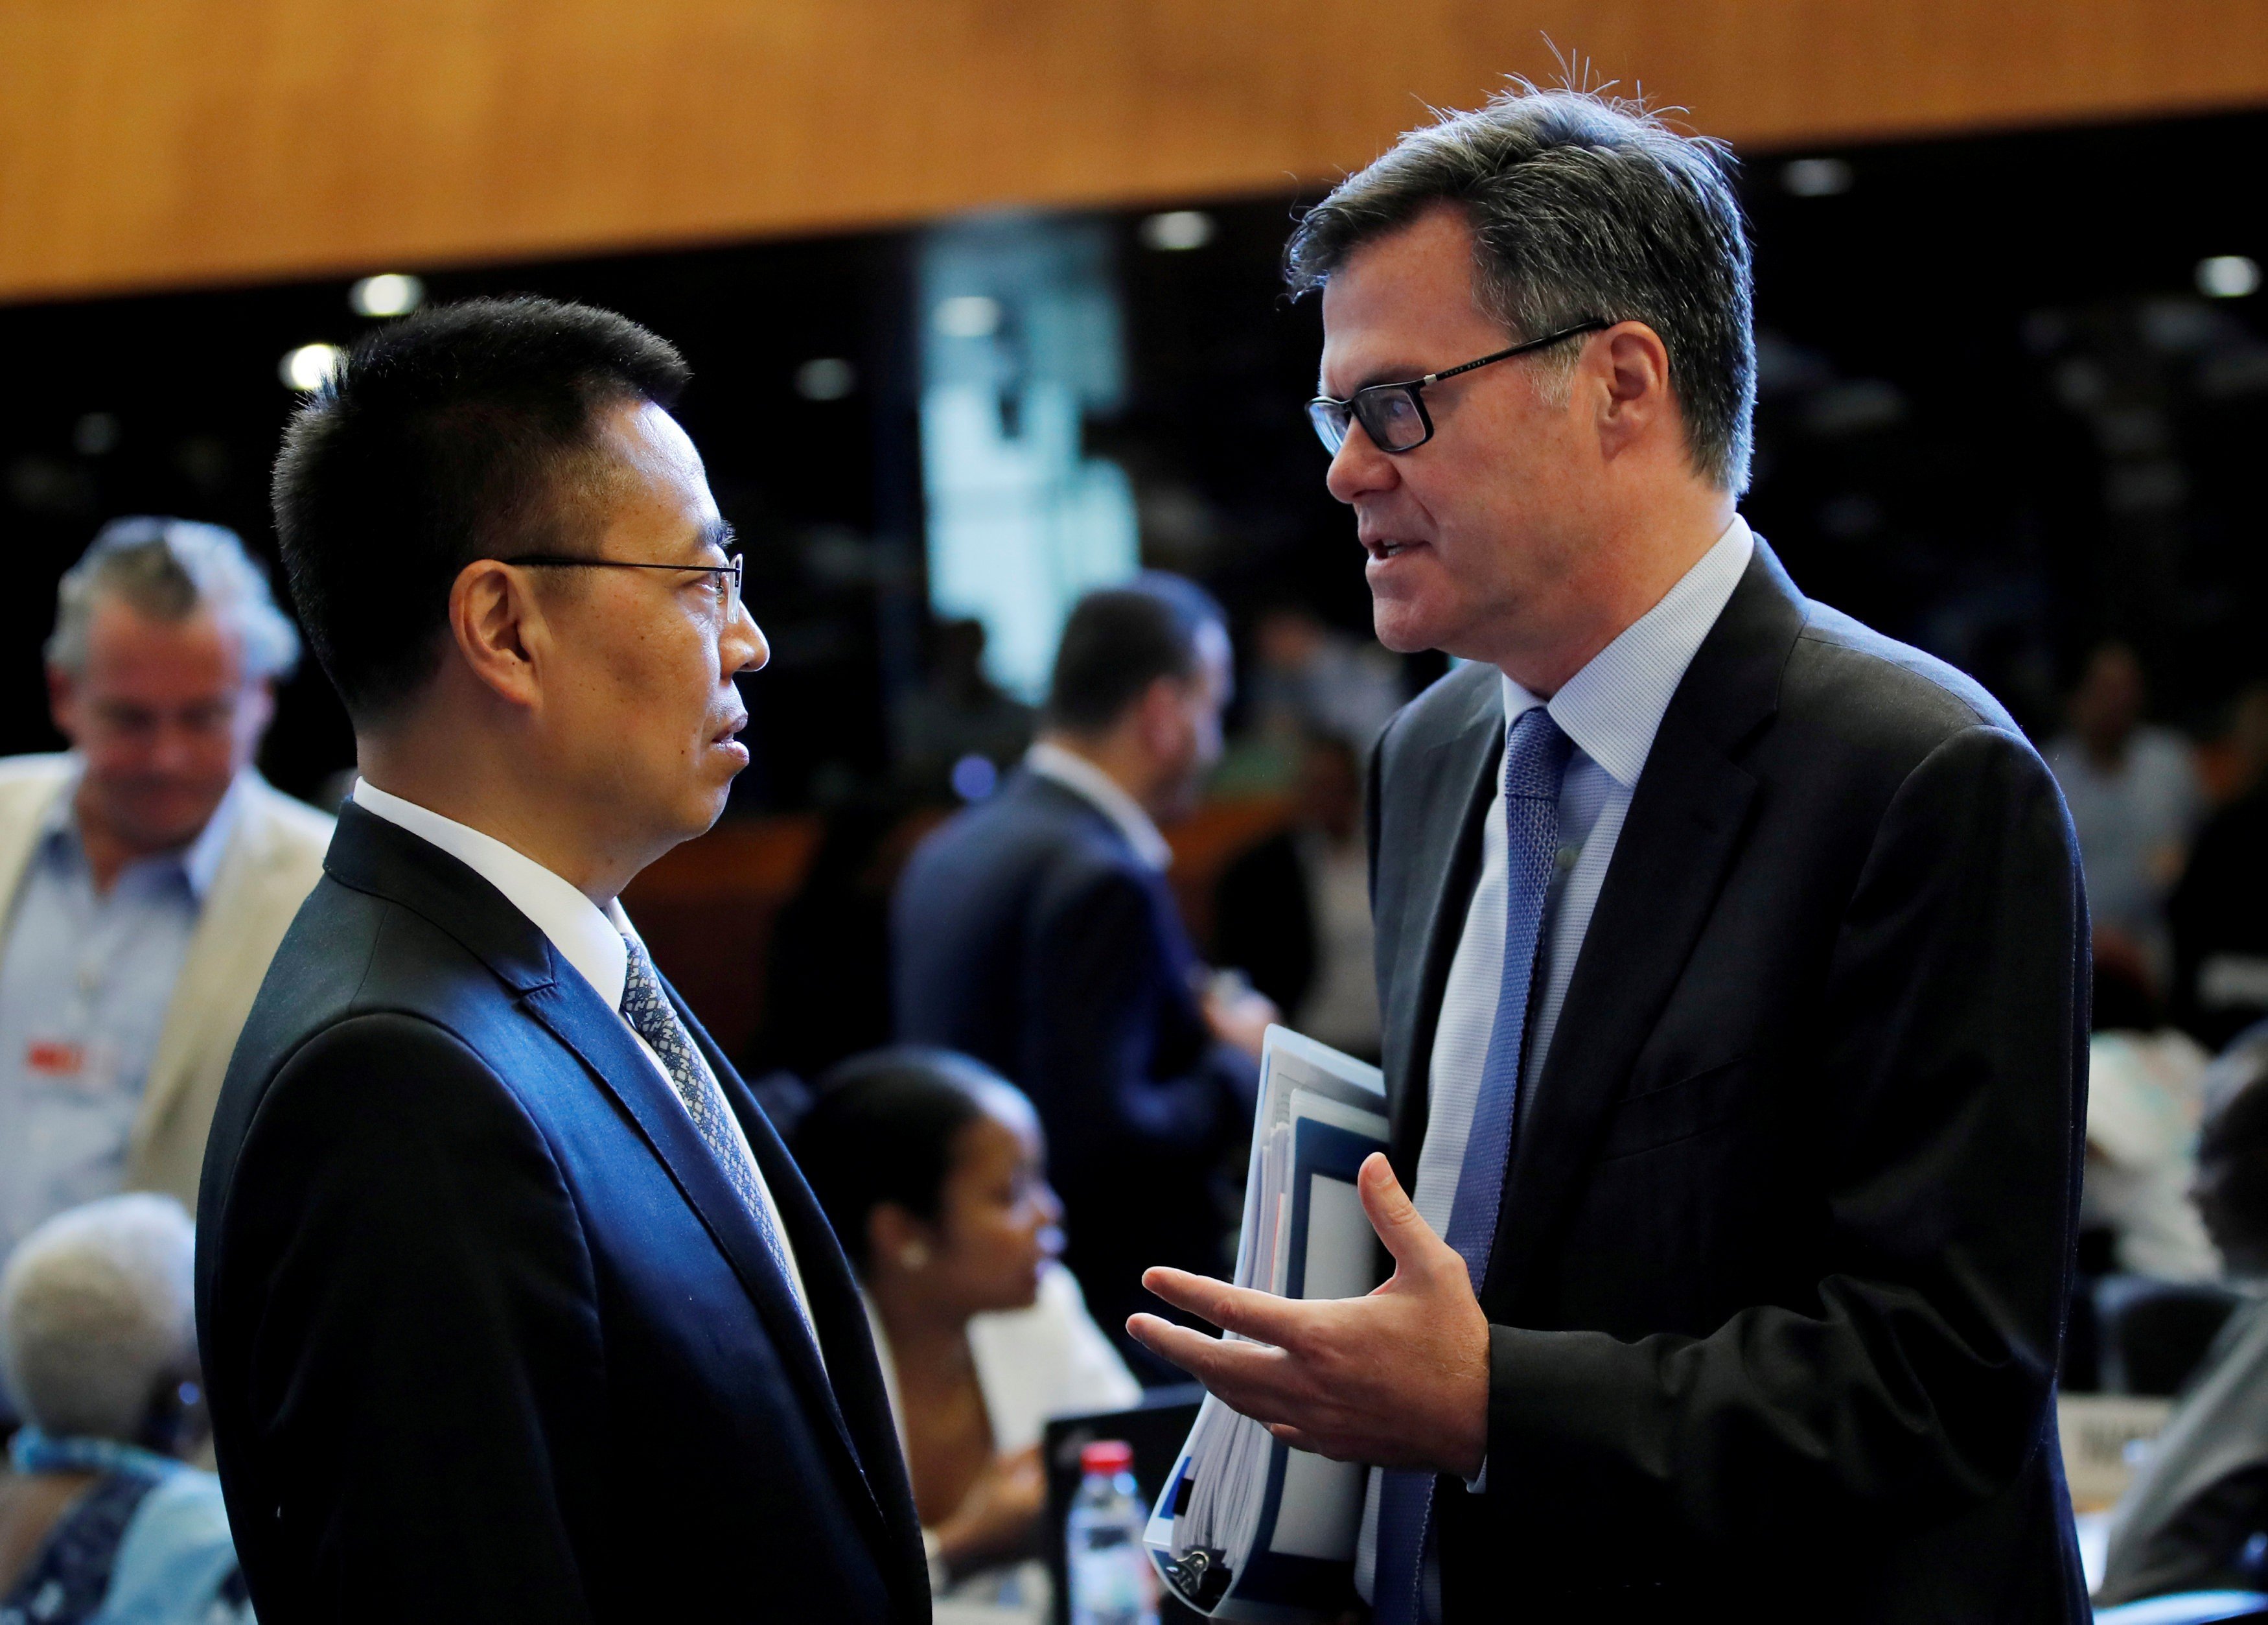 US ambassador to the WTO Dennis Shea (right) talks with his Chinese counterpart Zhang Xiangchen before the general council meeting at the World Trade Organisation in Geneva, Switzerland, on July 26, 2018. Photo: Reuters